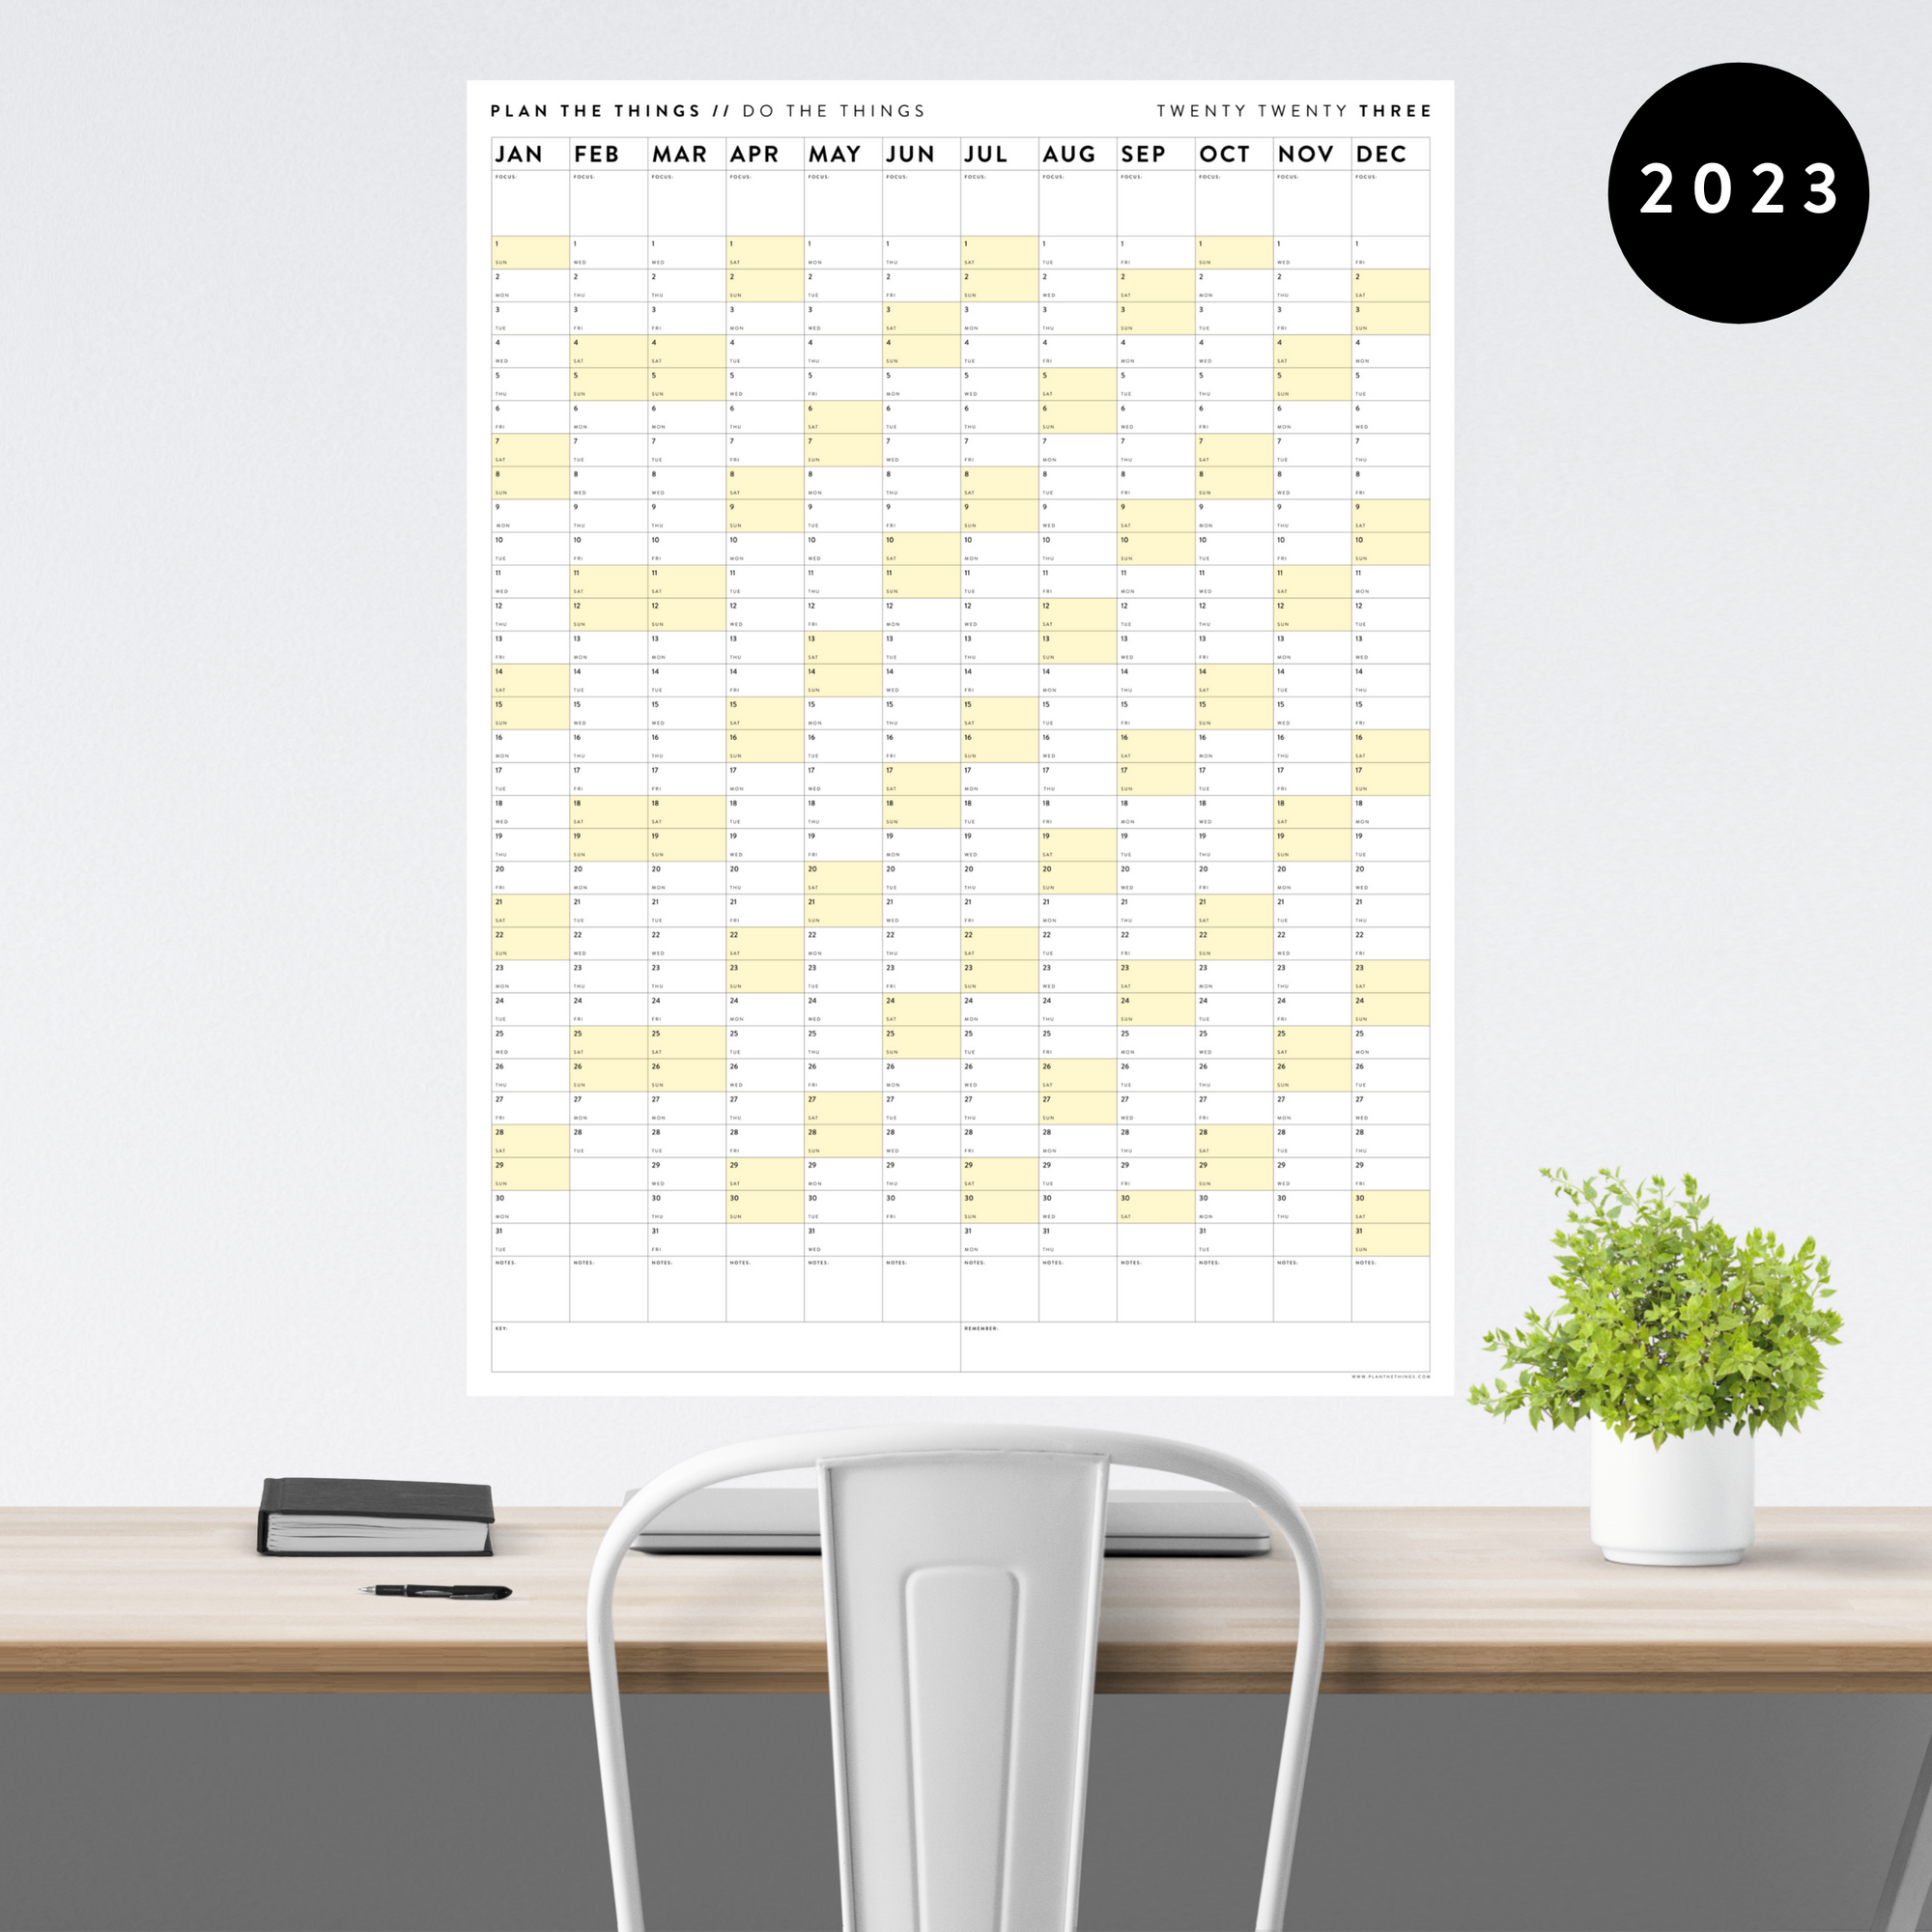 GIANT 2023 WALL CALENDAR | VERTICAL WITH YELLOW WEEKENDS